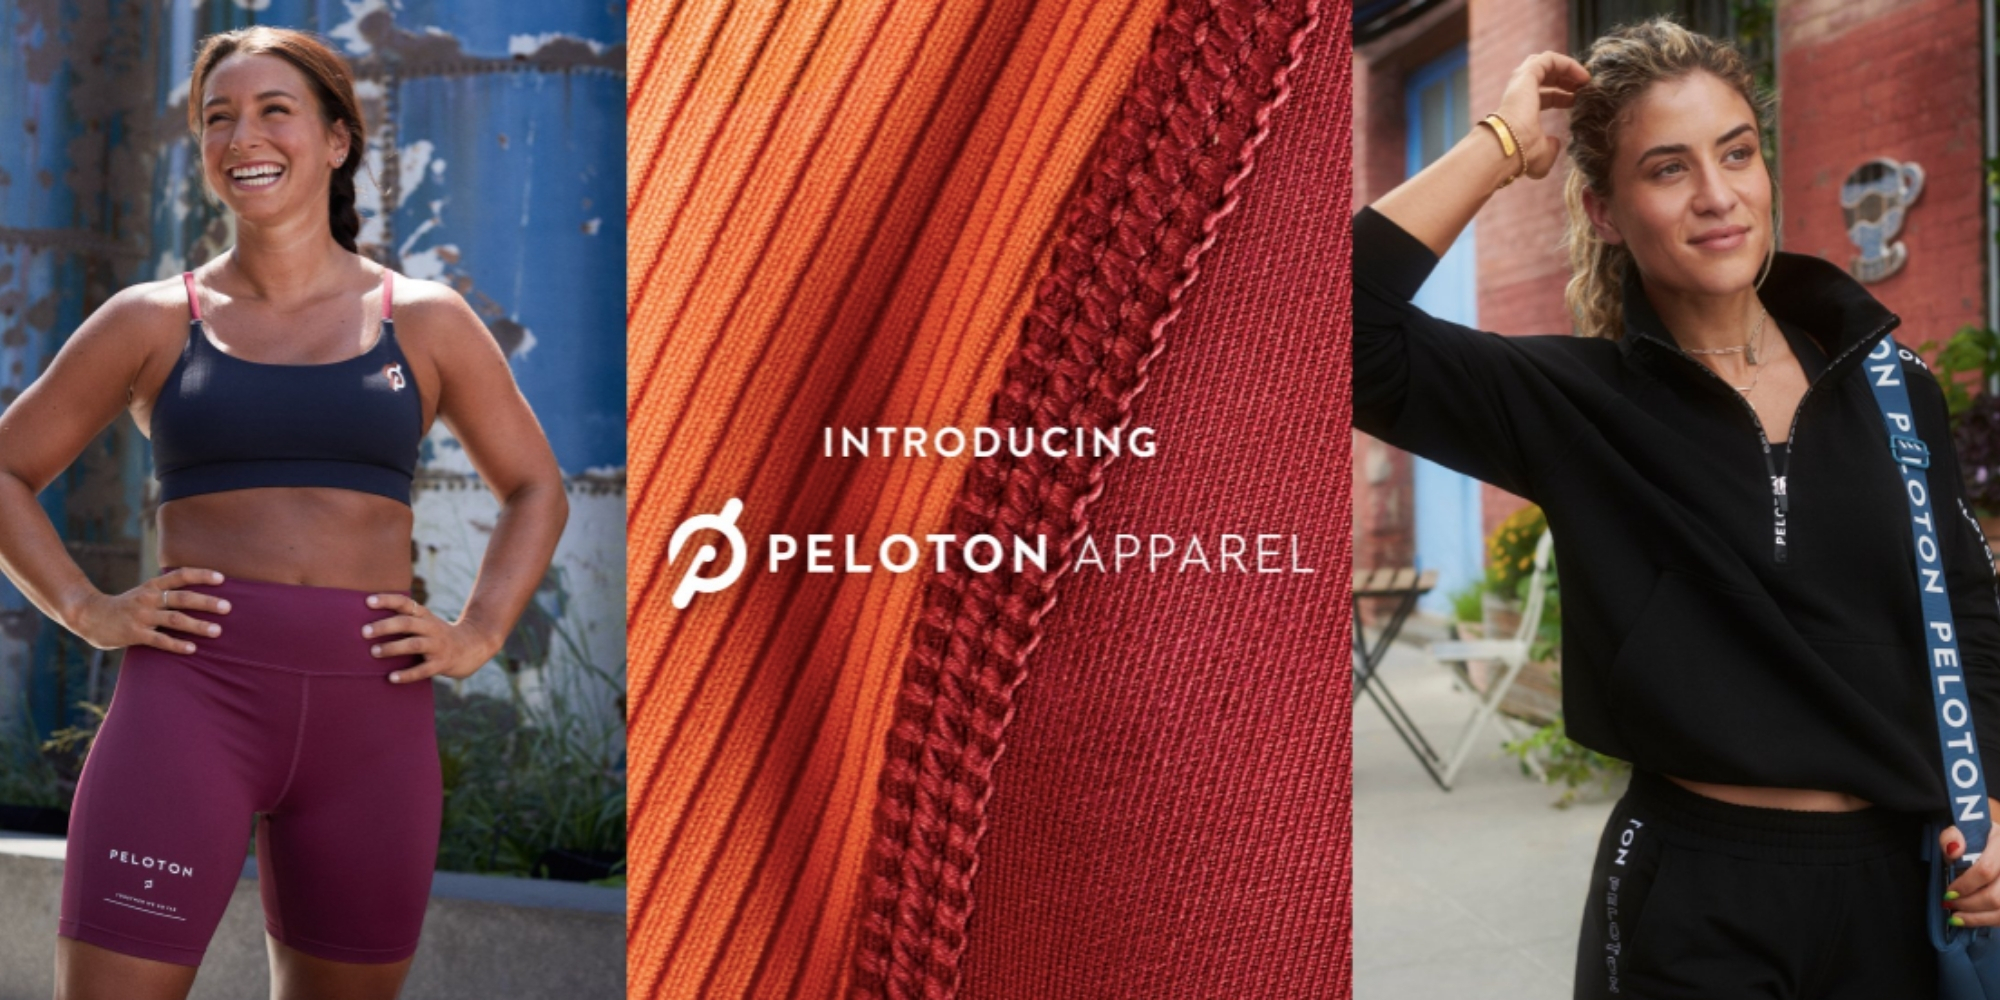 Peloton has launched its new apparel line